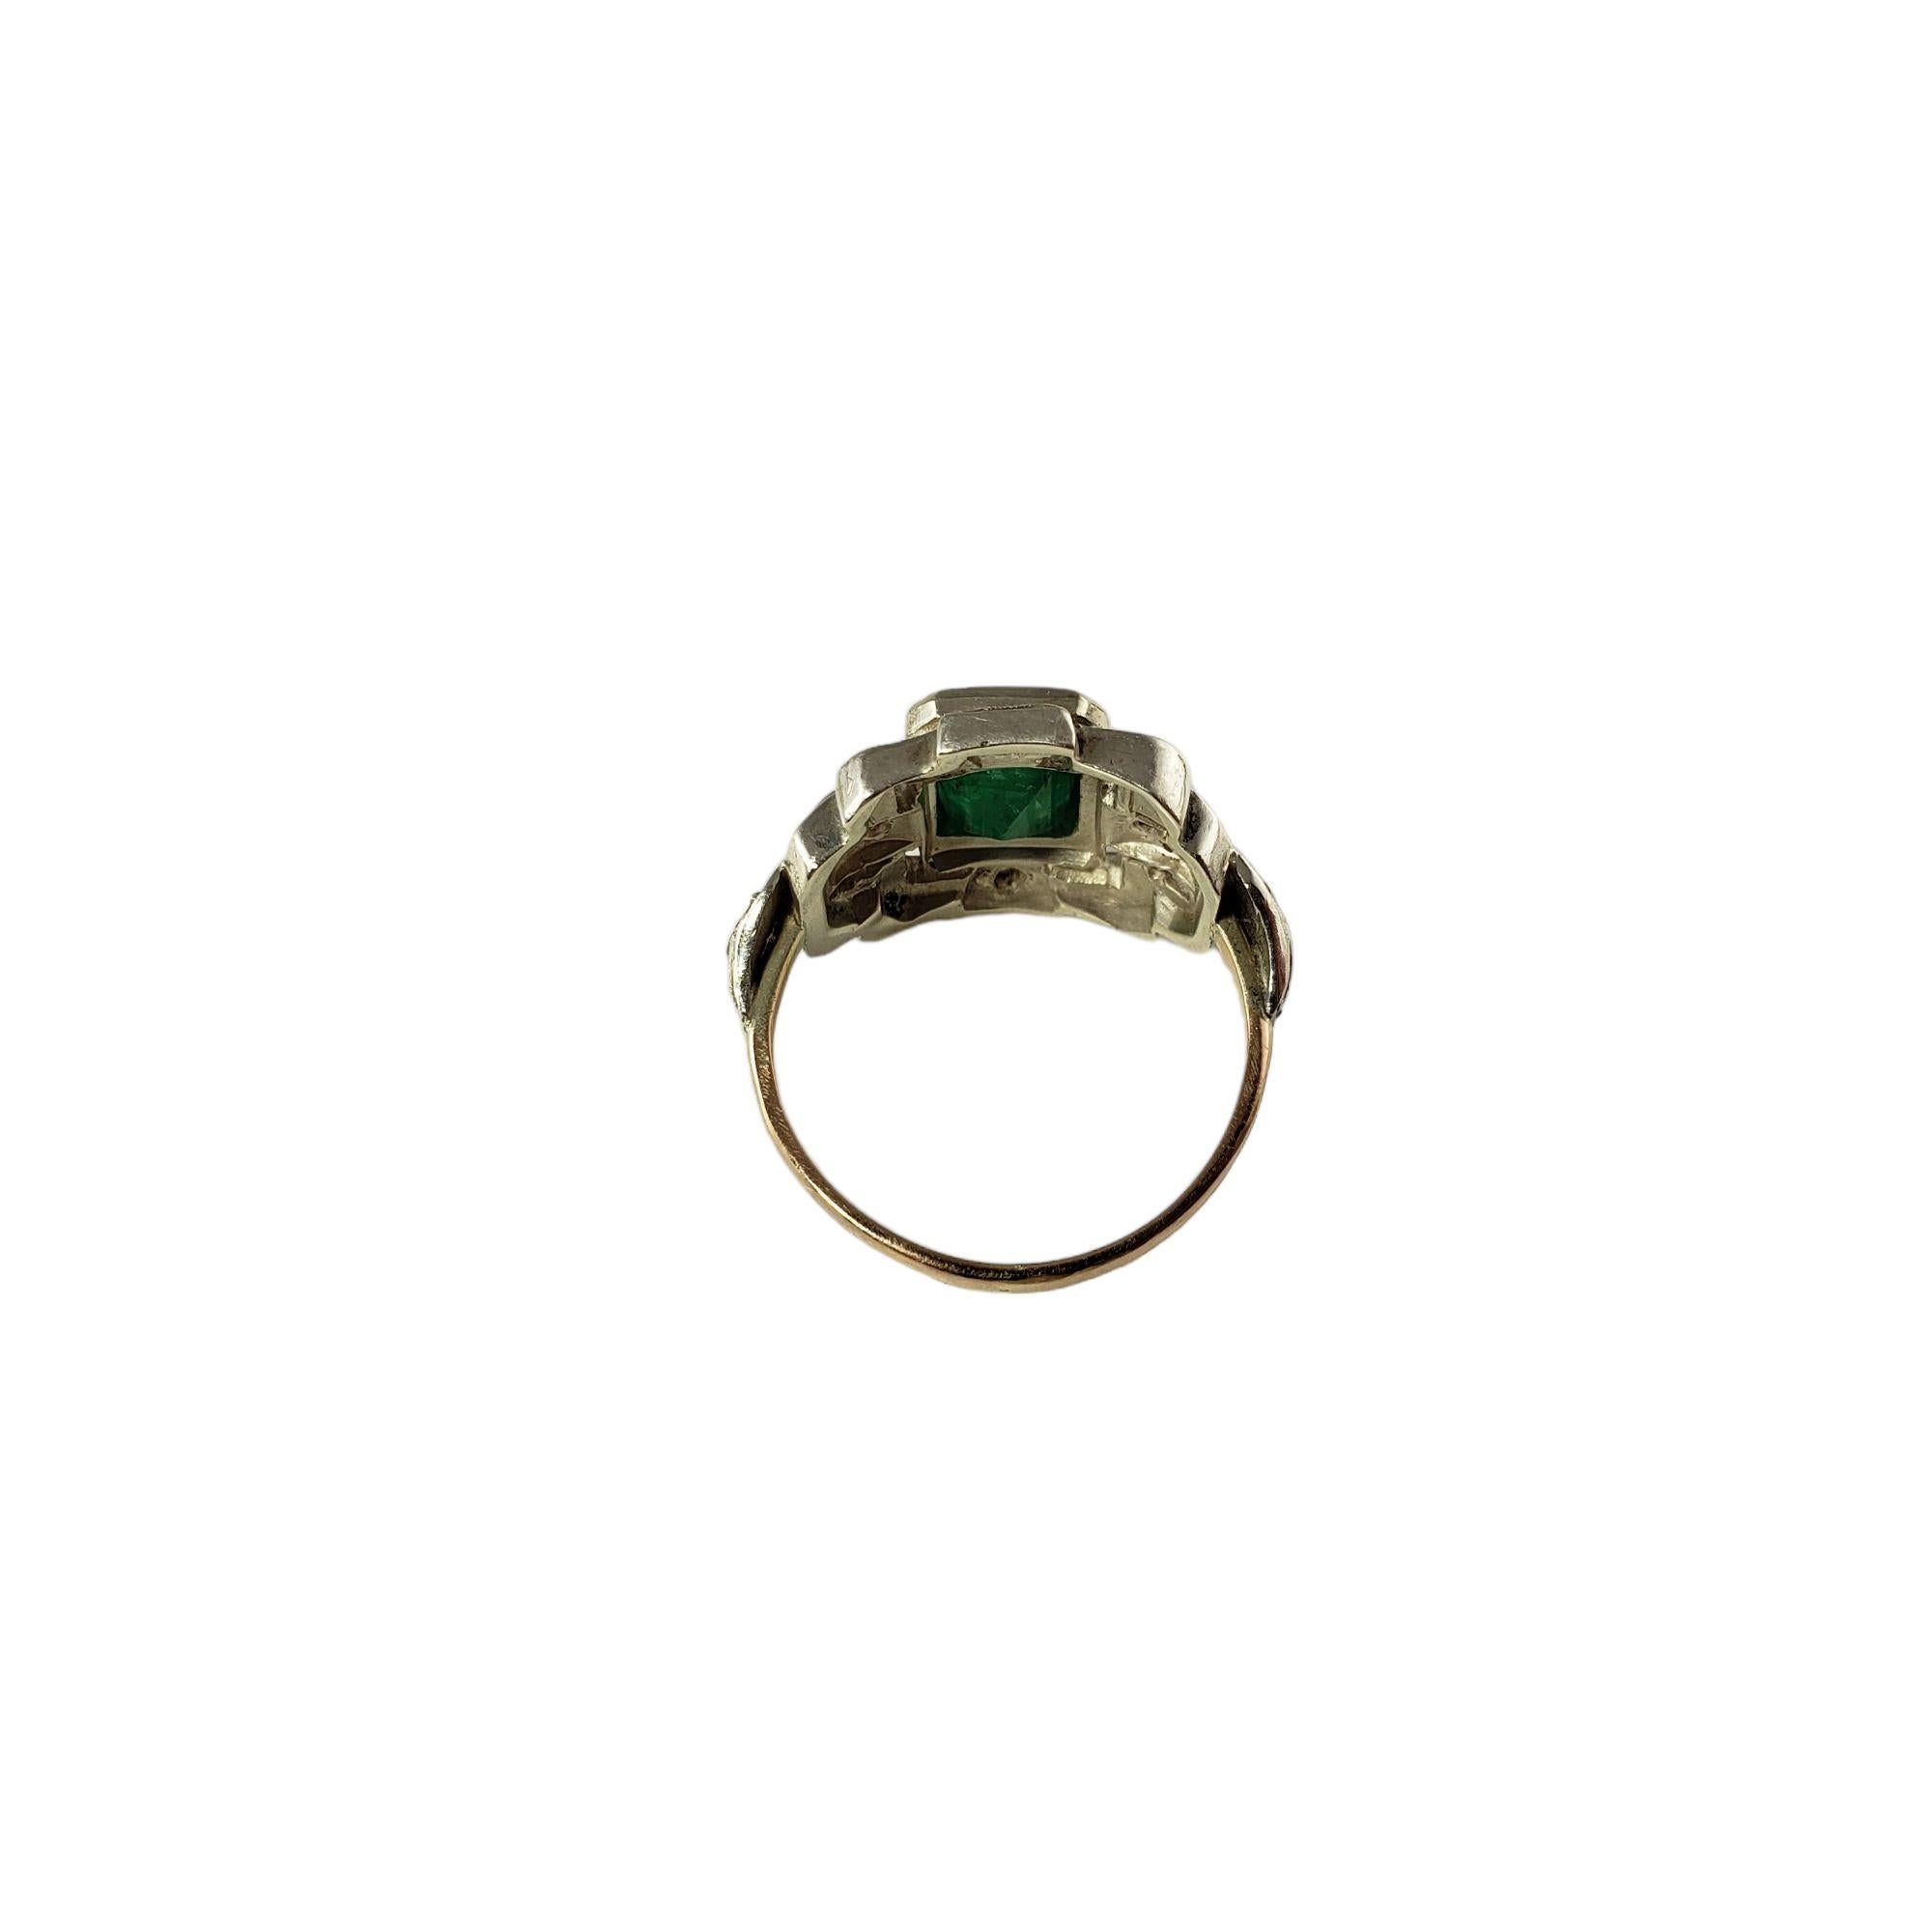 Vintage 10 Karat Yellow/White Gold Emerald and Diamond Ring Size 7 JAGi Certified-

This stunning ring features one emerald cut emerald ( 7 mm x 6 mm) and eight round single cut diamonds set in beautifully detailed 10K white and yellow gold. Width: